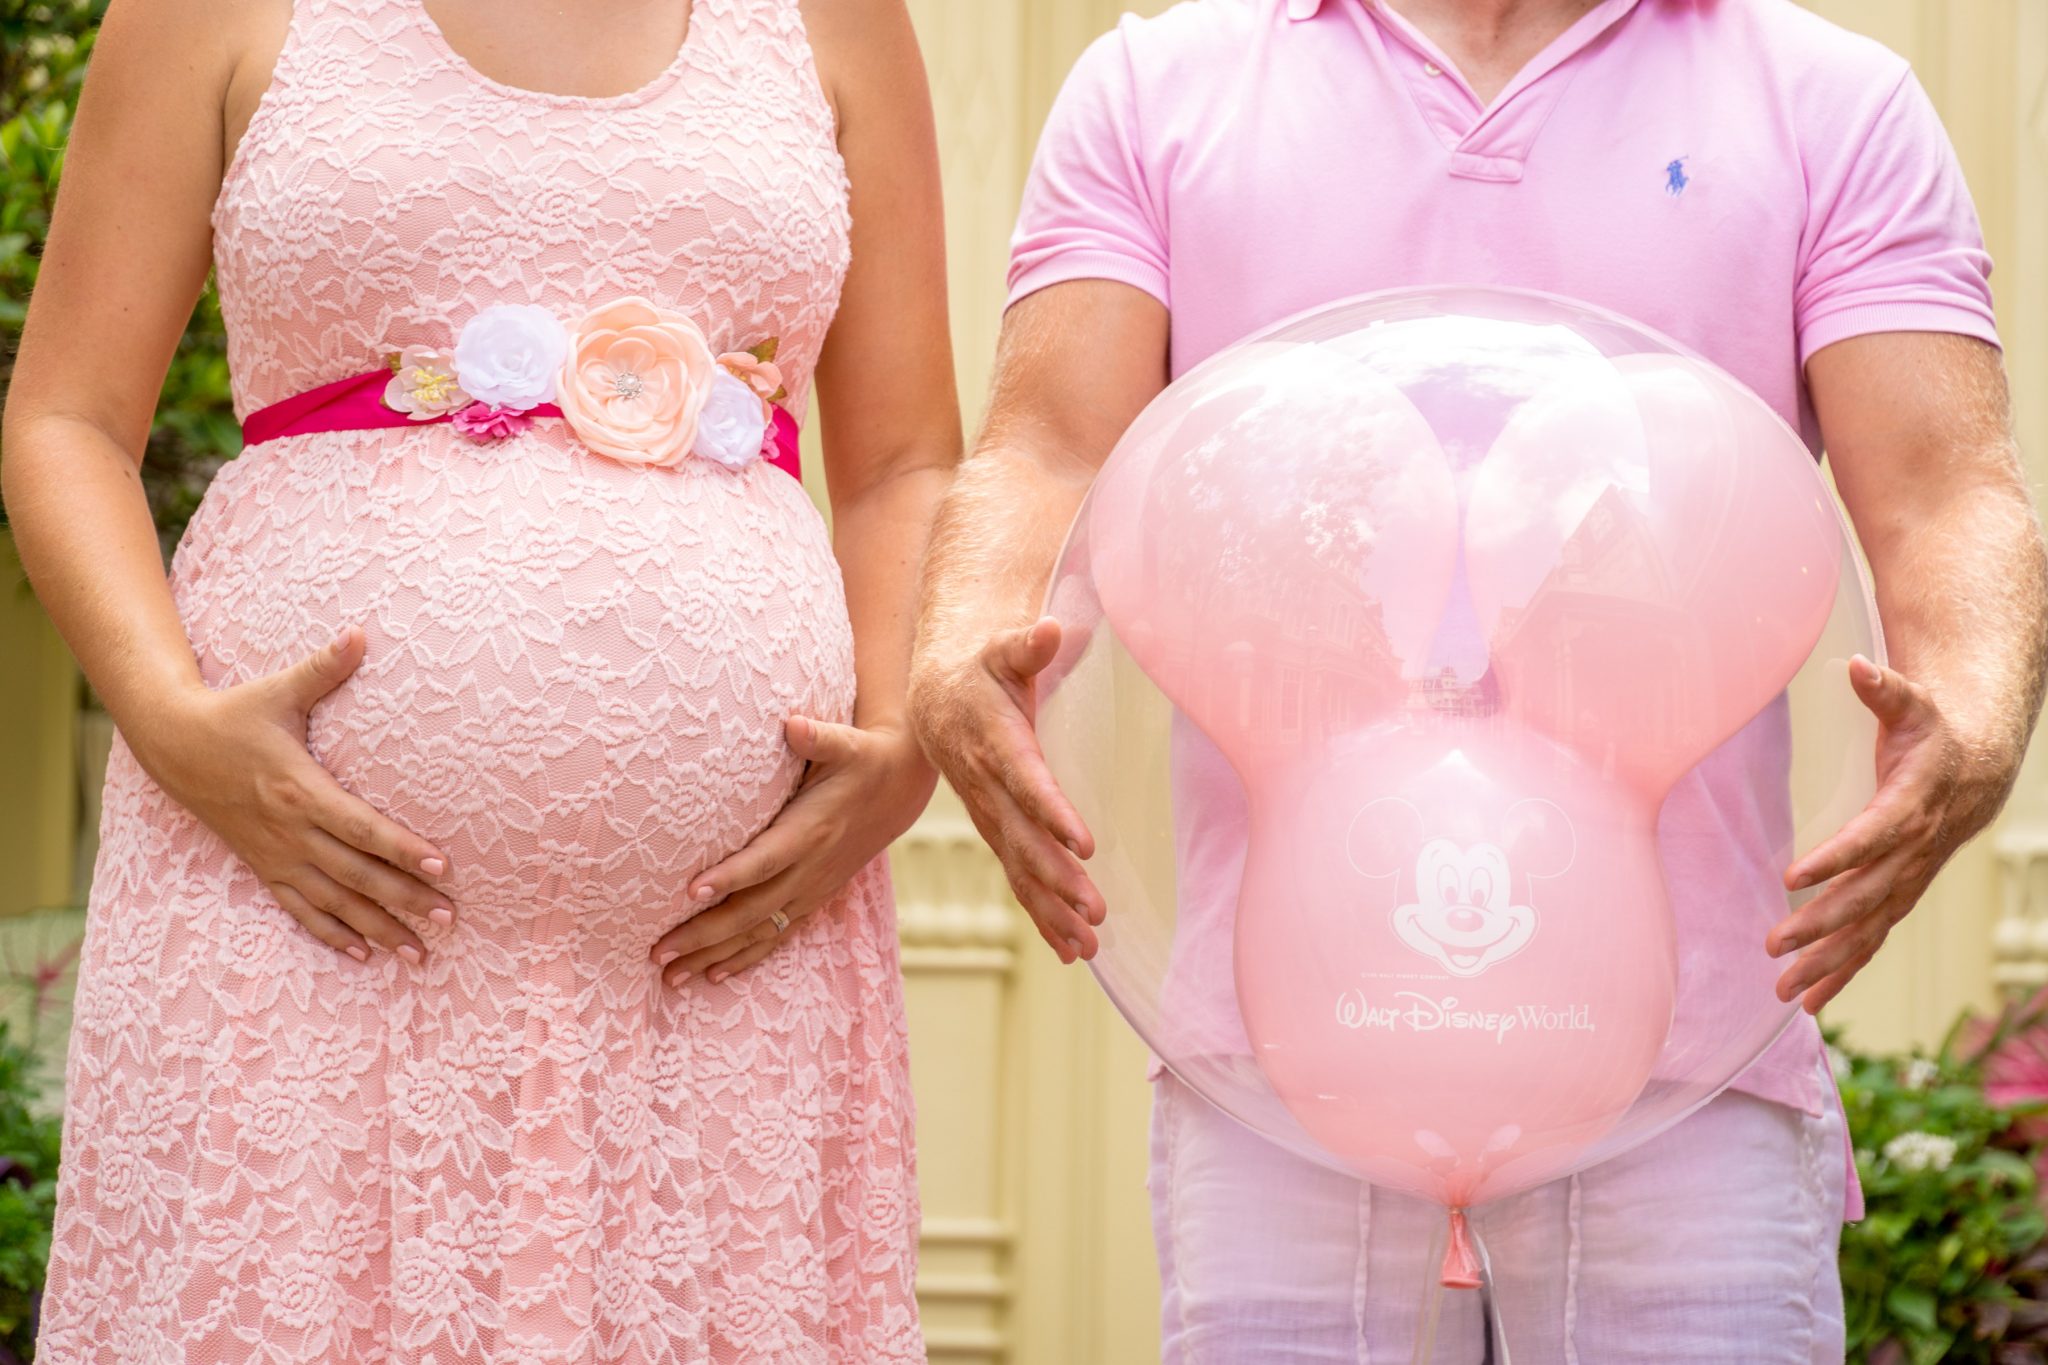 Walt Disney World While Pregnant featured by top US Disney blogger, Marcie and the Mouse | Walt Disney World maternity photo shoot